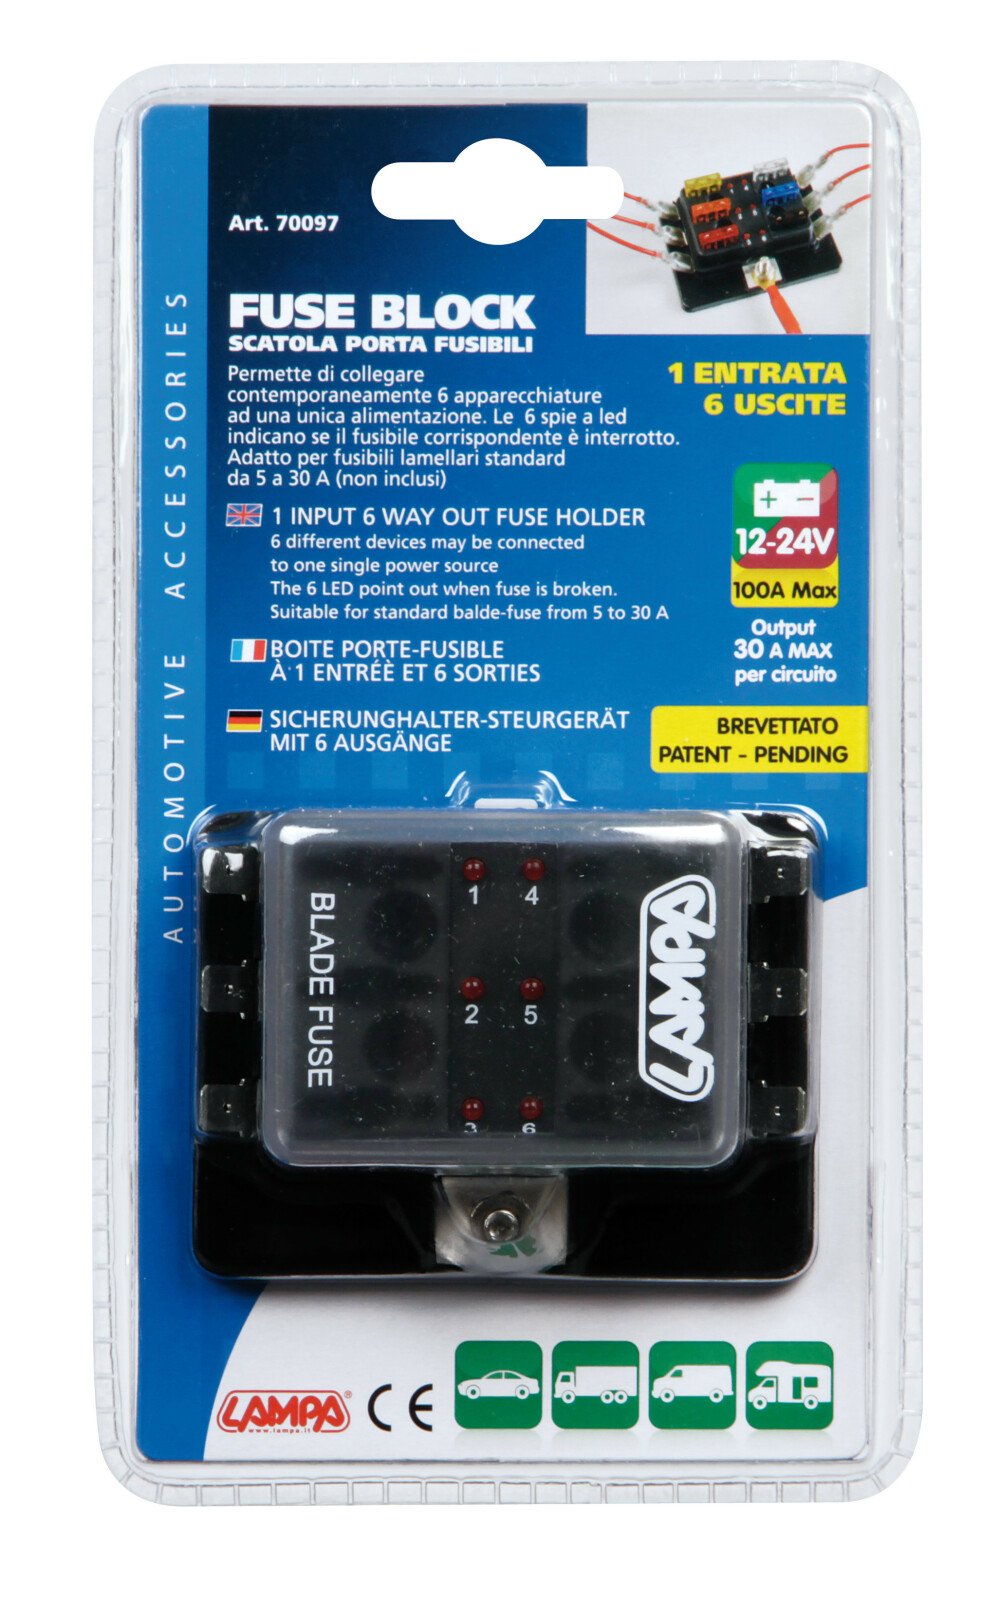 Fuse Block, 1 input - 6 way out, fuse holder, 12/24V thumb